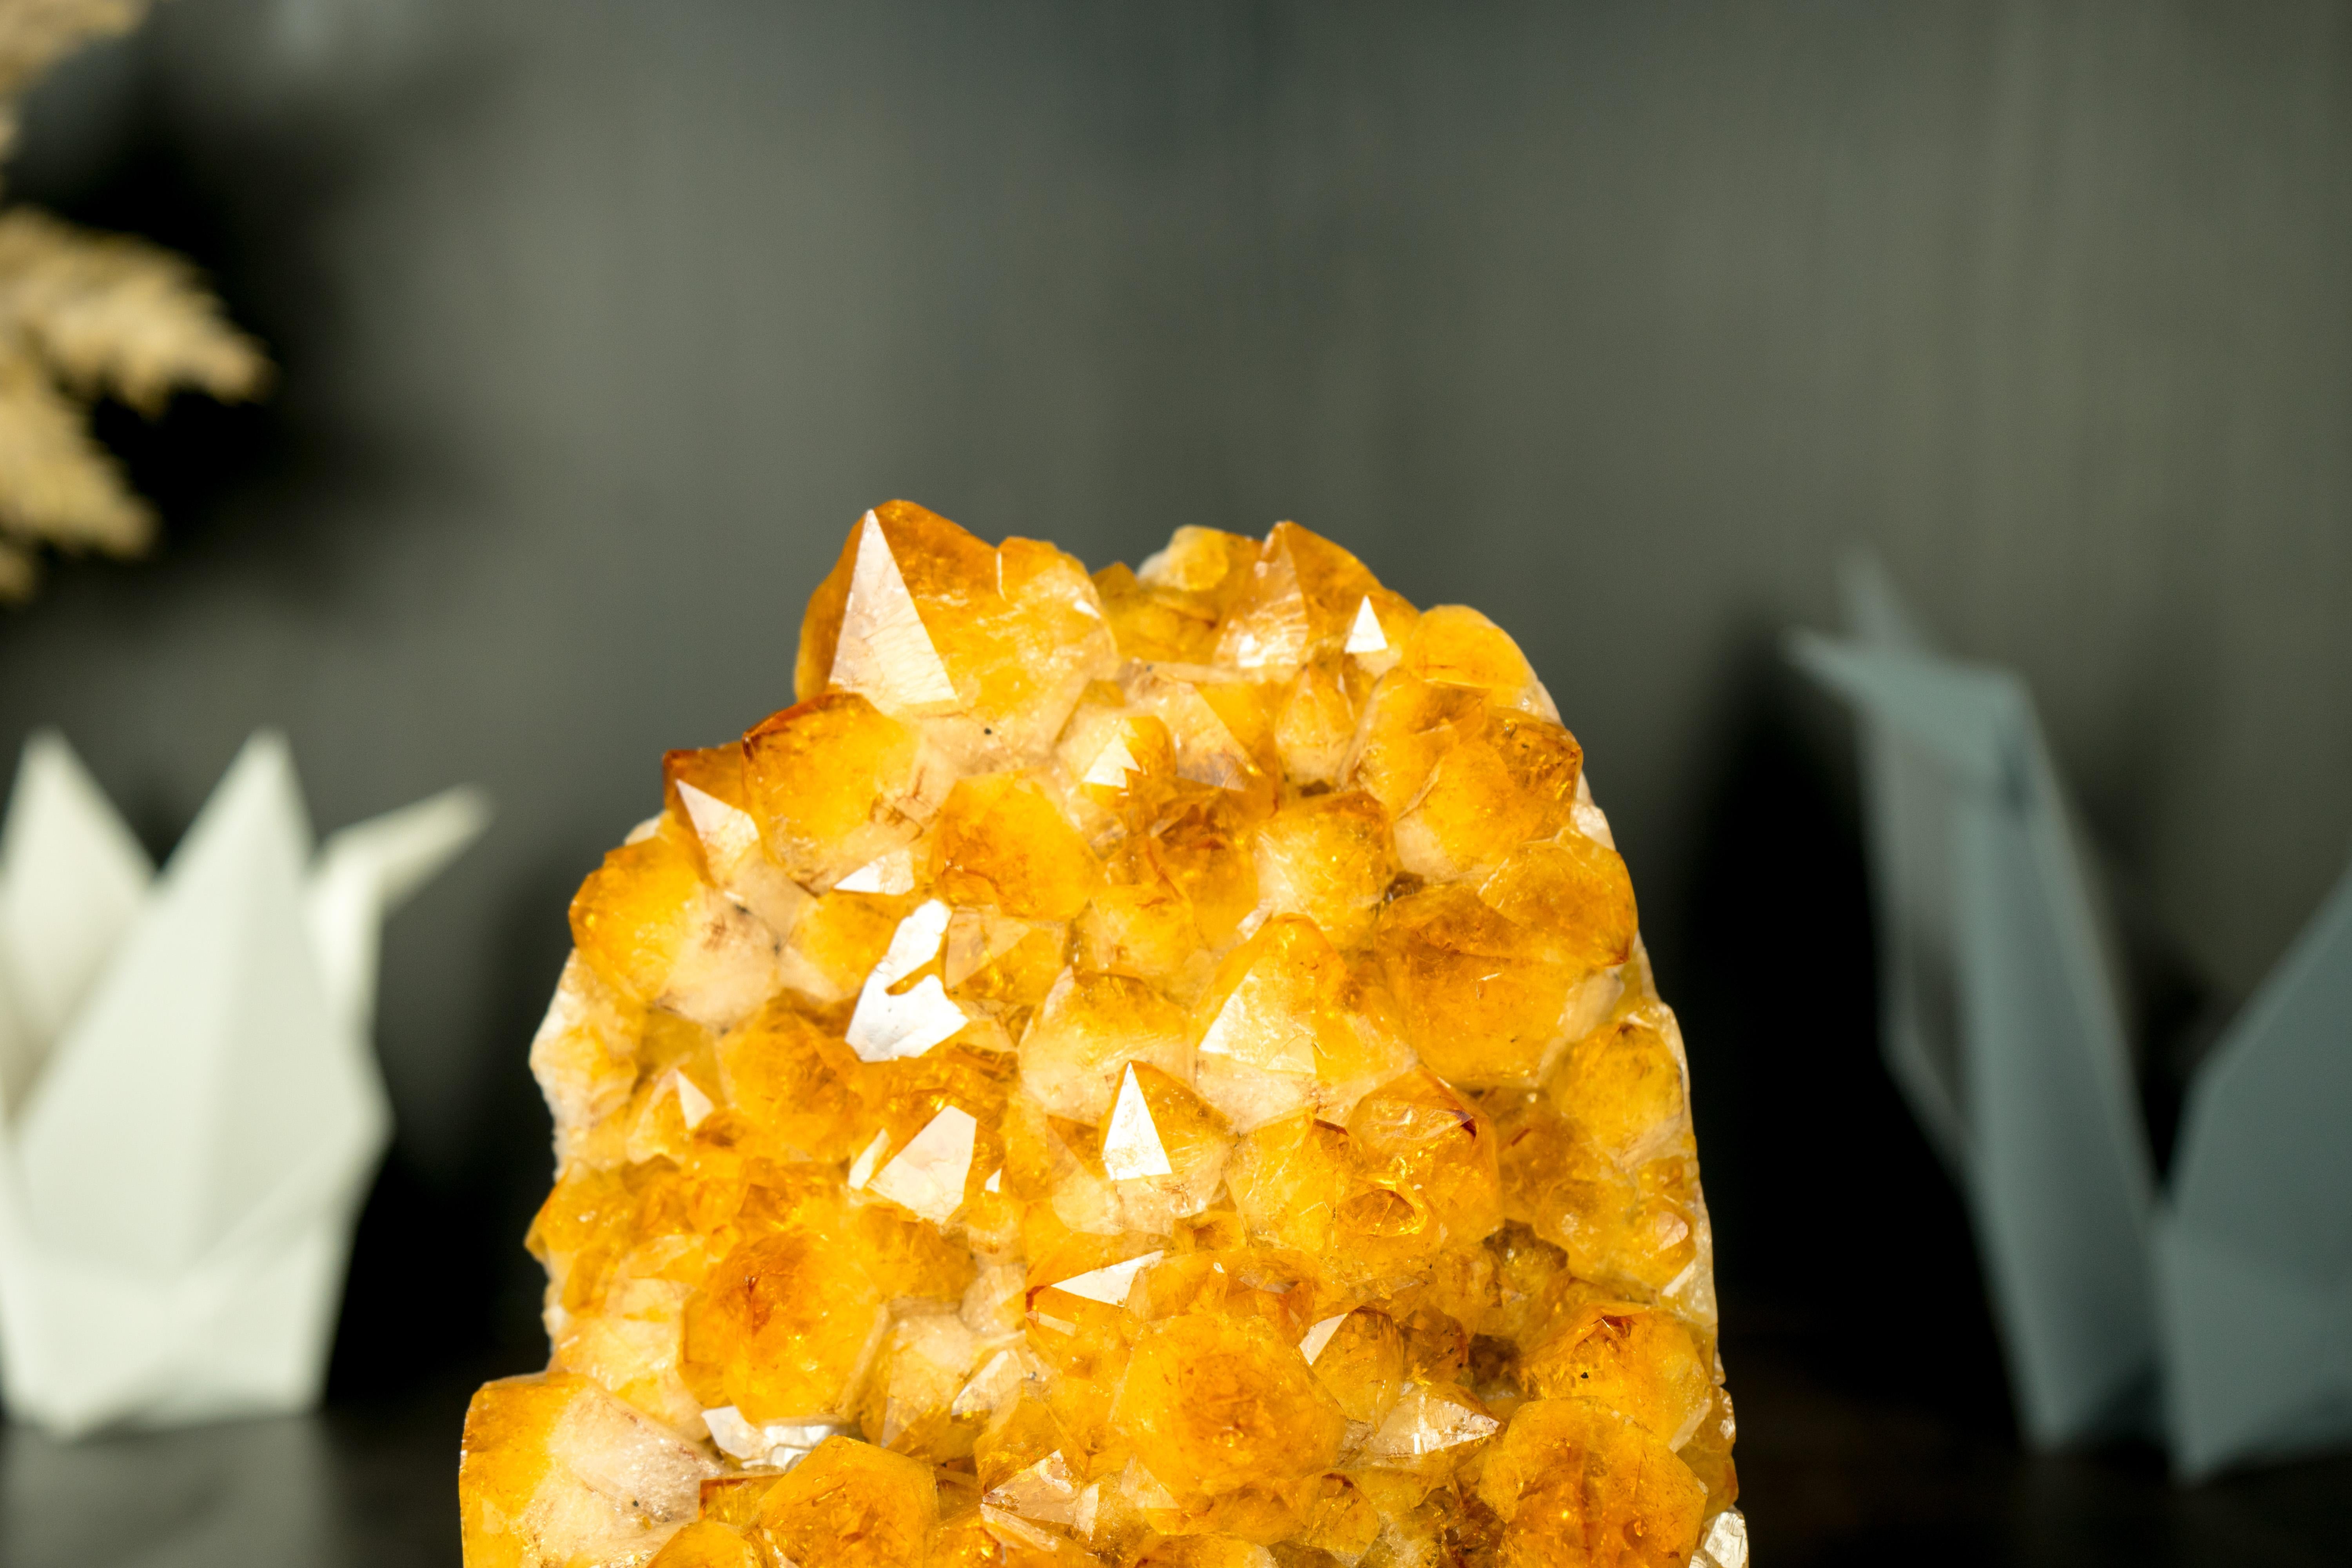 Golden Sparkles: A Small, High Grade Golden Yellow Citrine Cluster

▫️ Description

A small yet impressive Citrine cluster, this specimen captures attention at first sight. With gorgeous aesthetics that mix shiny Golden Yellow Citrine druzy in a